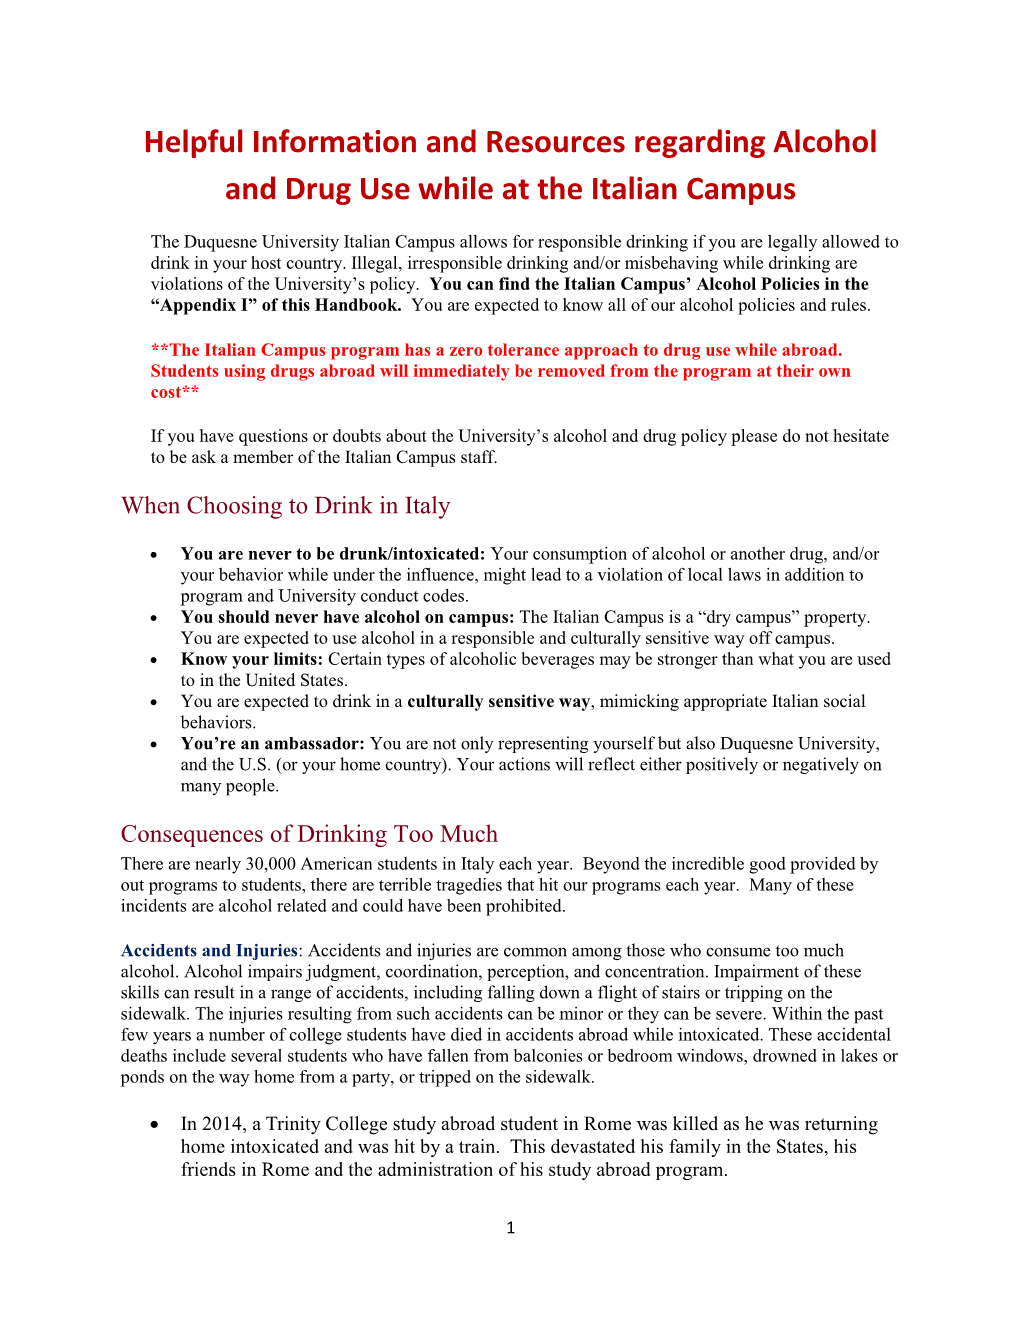 Helpful Information and Resources Regarding Alcohol and Drug Use While at the Italian Campus